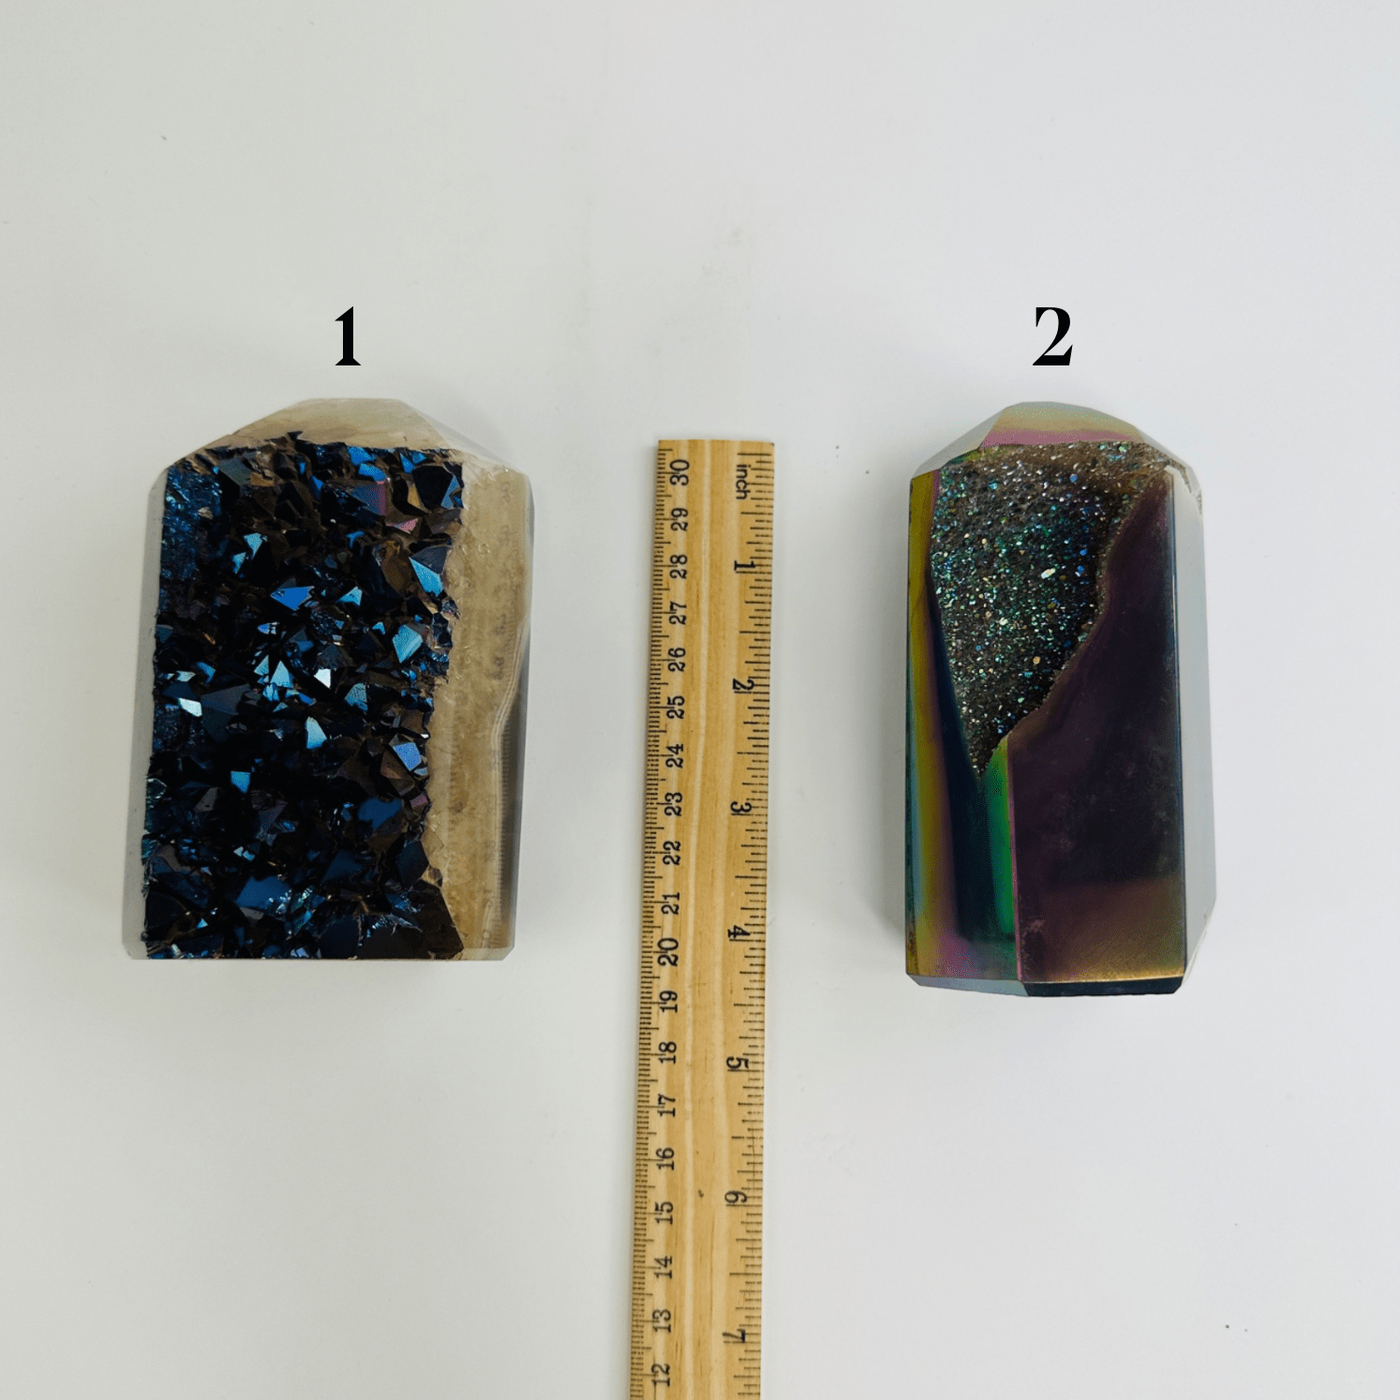 variant 1 of rainbow titanium coated agate points next to a ruler for size reference